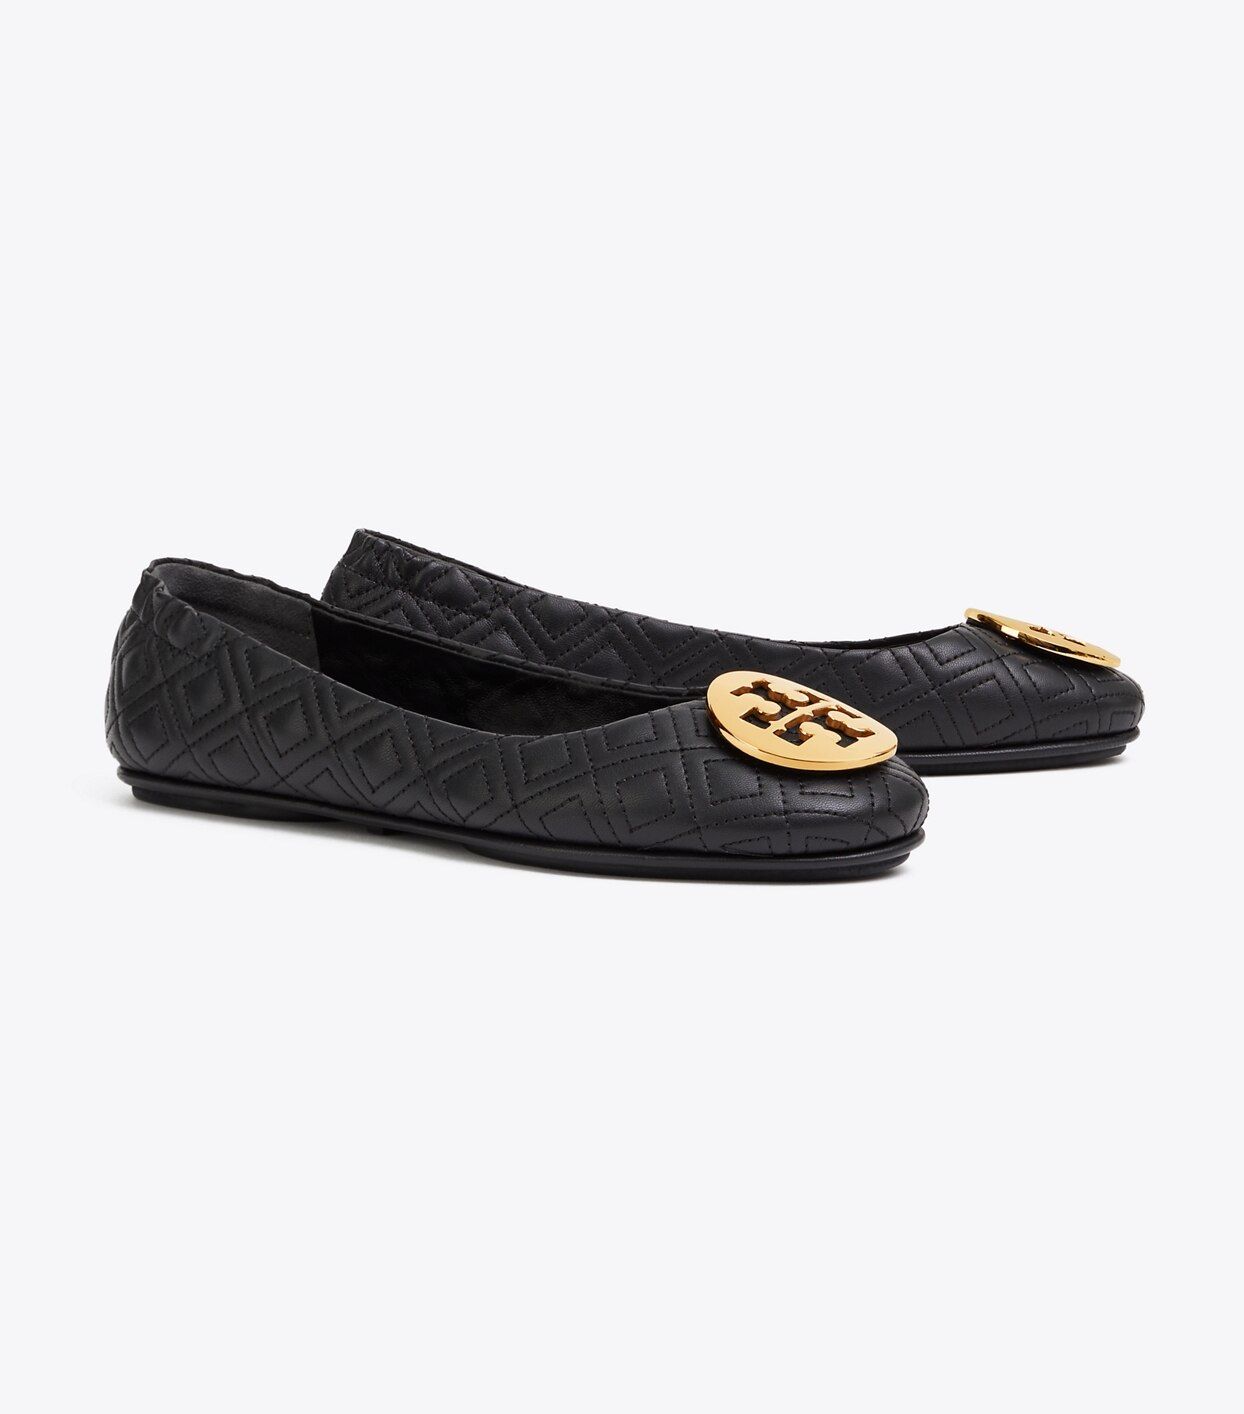 Tory Burch Minnie Travel Ballet Flat, Quilted Leather: Women's Shoes | Tory Burch (US)